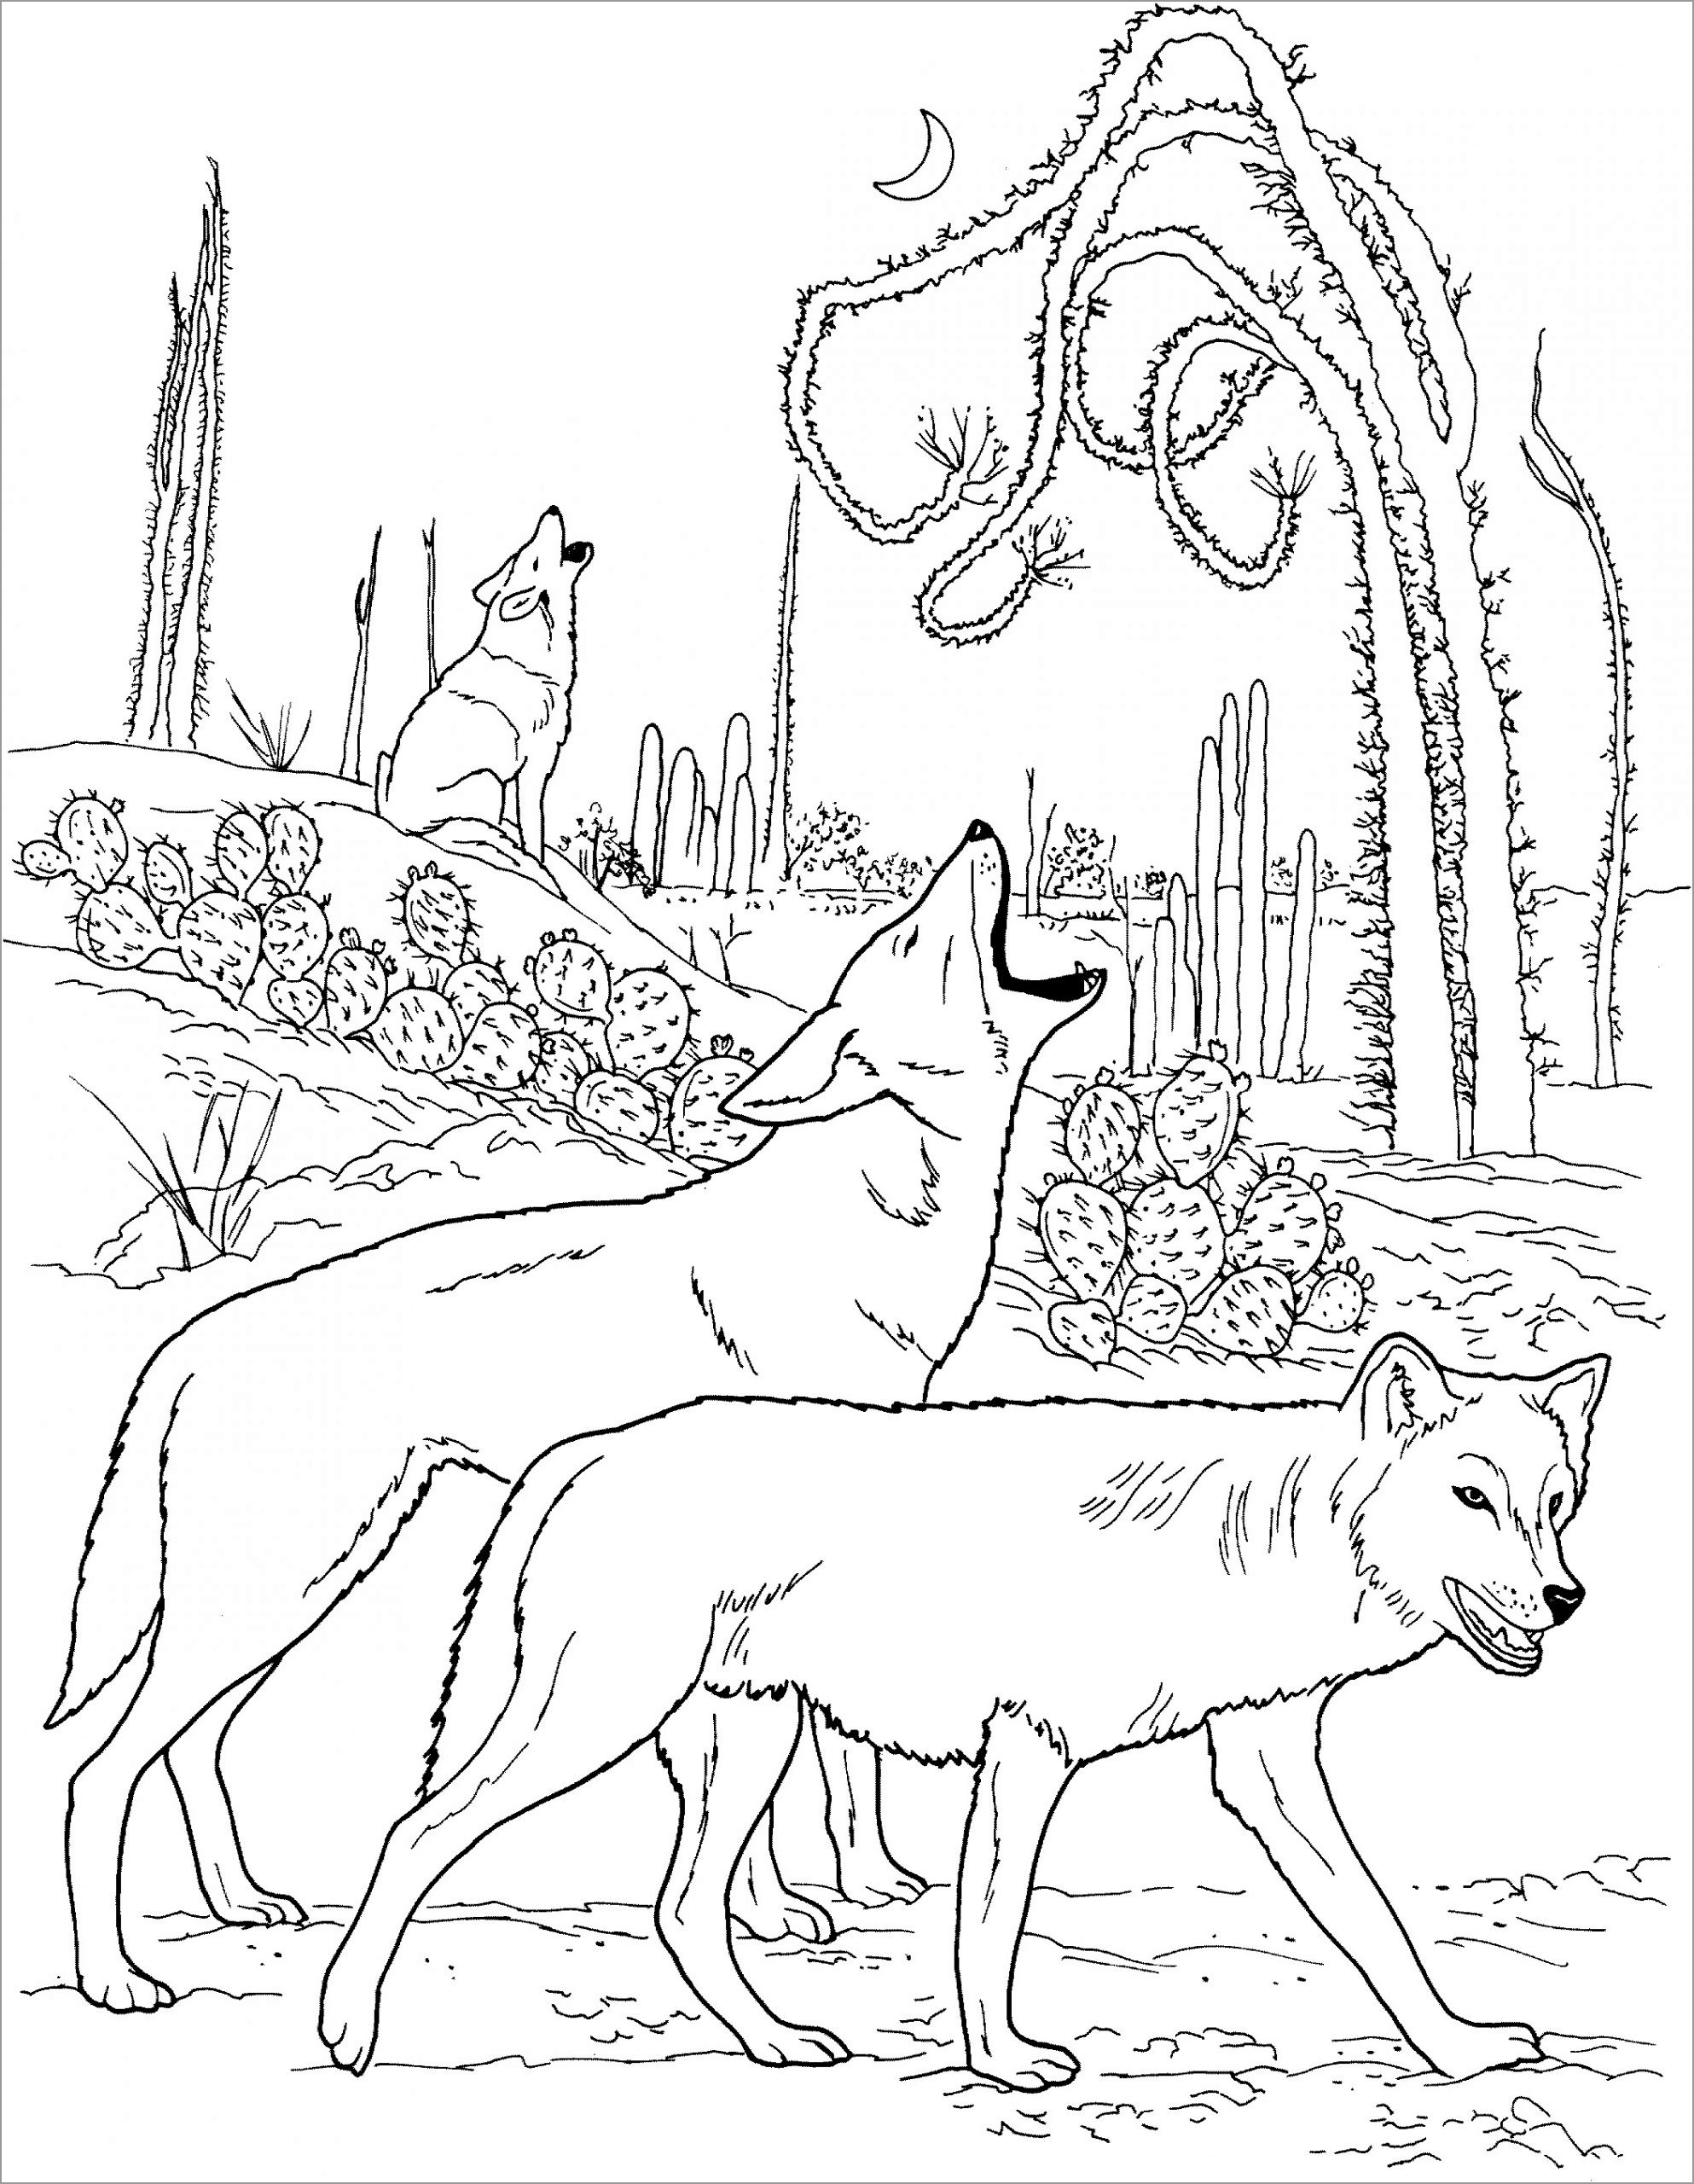 Howling Wolf Coloring Page for Adult